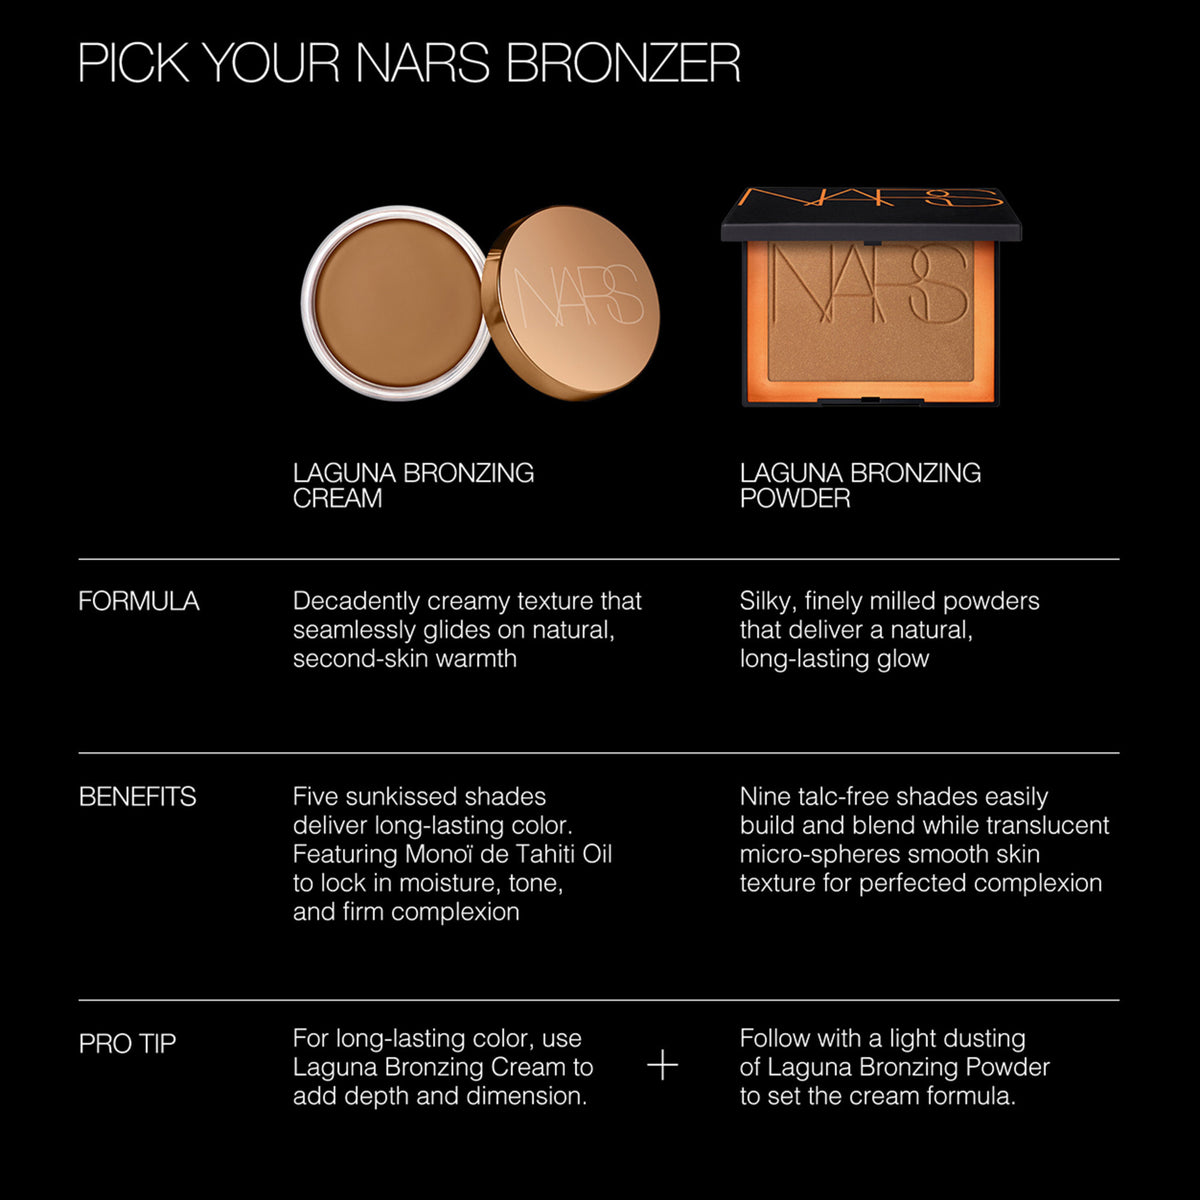 Nars Laguna Bronzing Powder . This product is for deep complexions